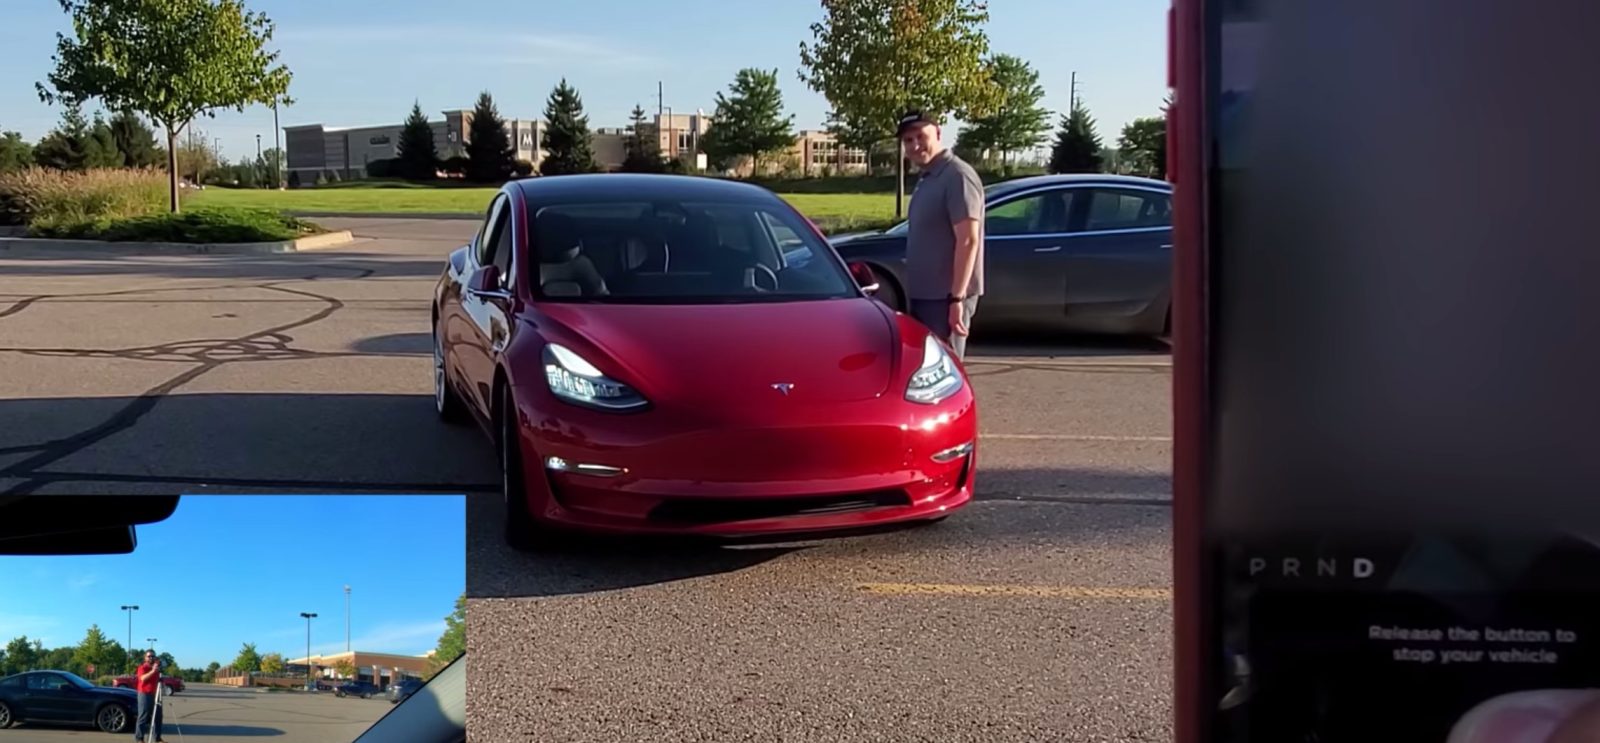 Tesla Owners Are Already Doing Dumb Things With Smart